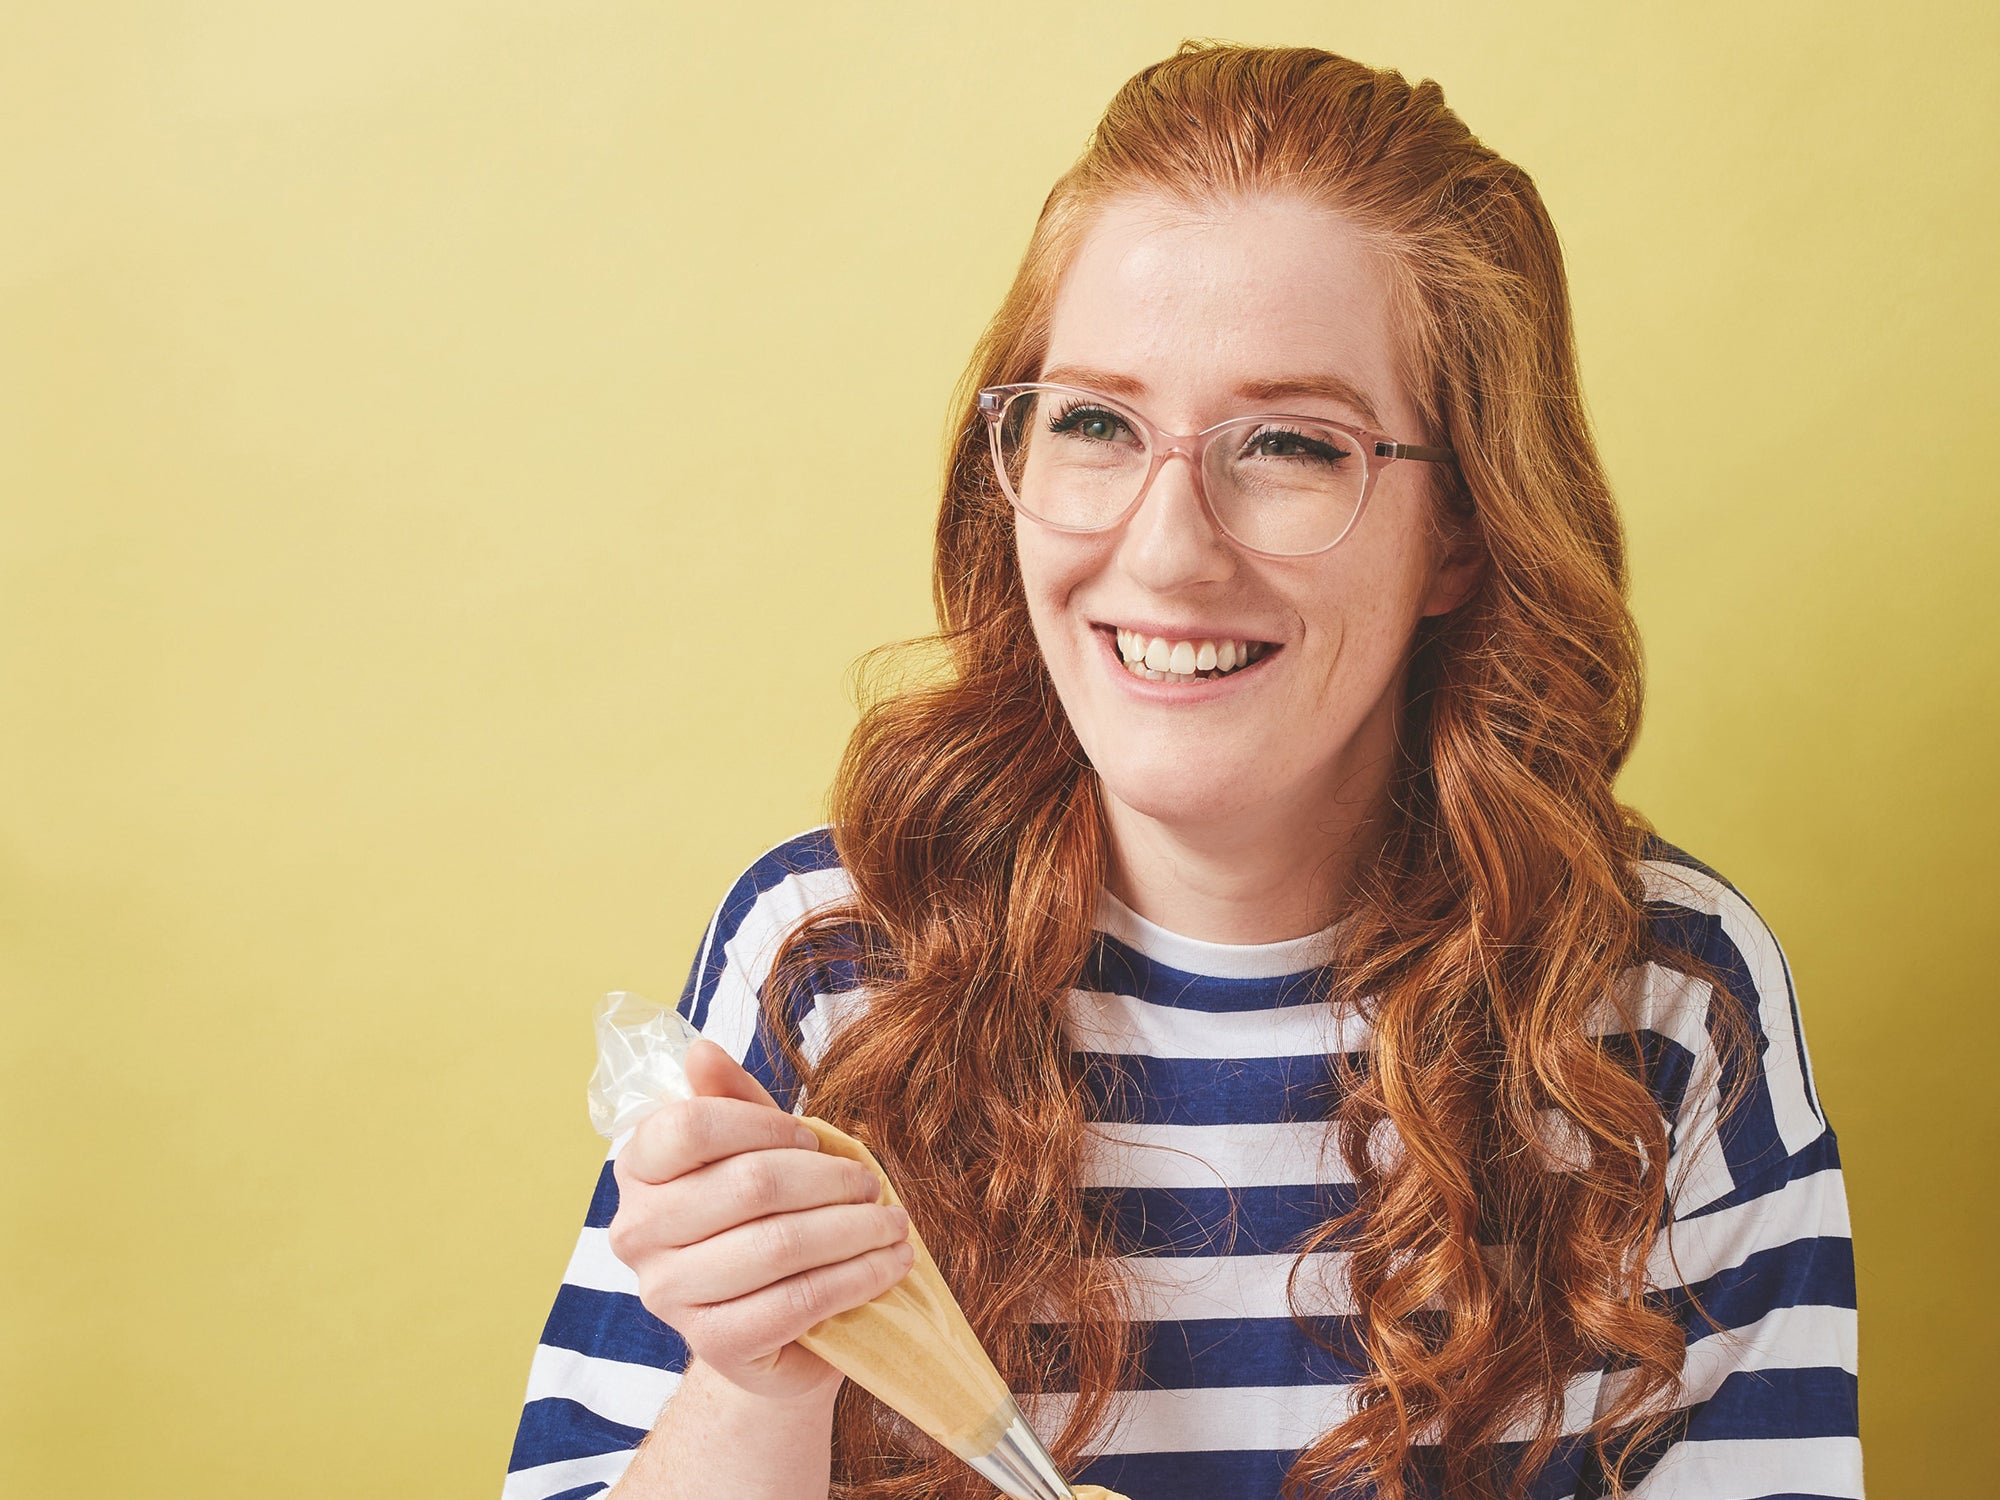 Dunn, 28, has been blogging her bakes for six-and-a-half years